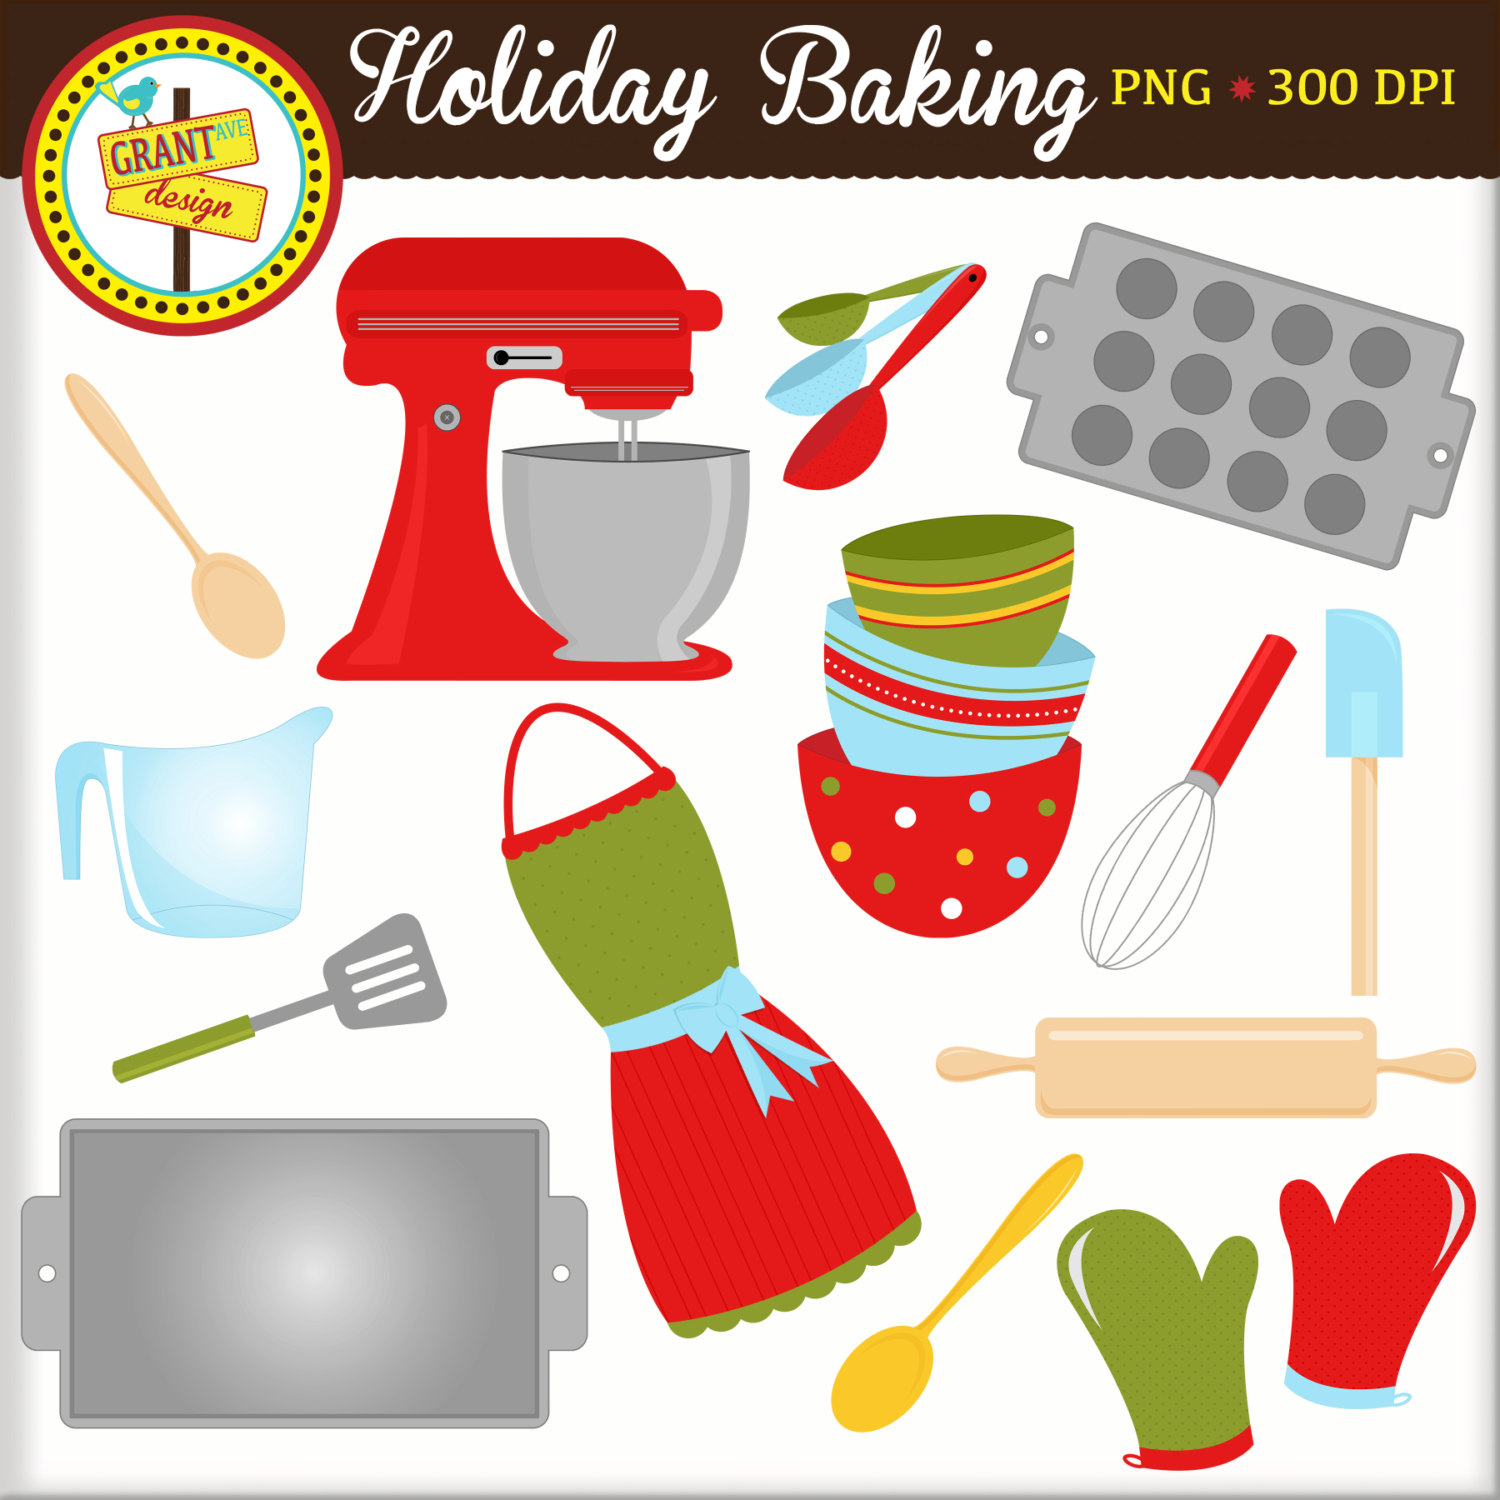 Holiday Baking Clipart Christmas Clipart By Grantavenuedesign